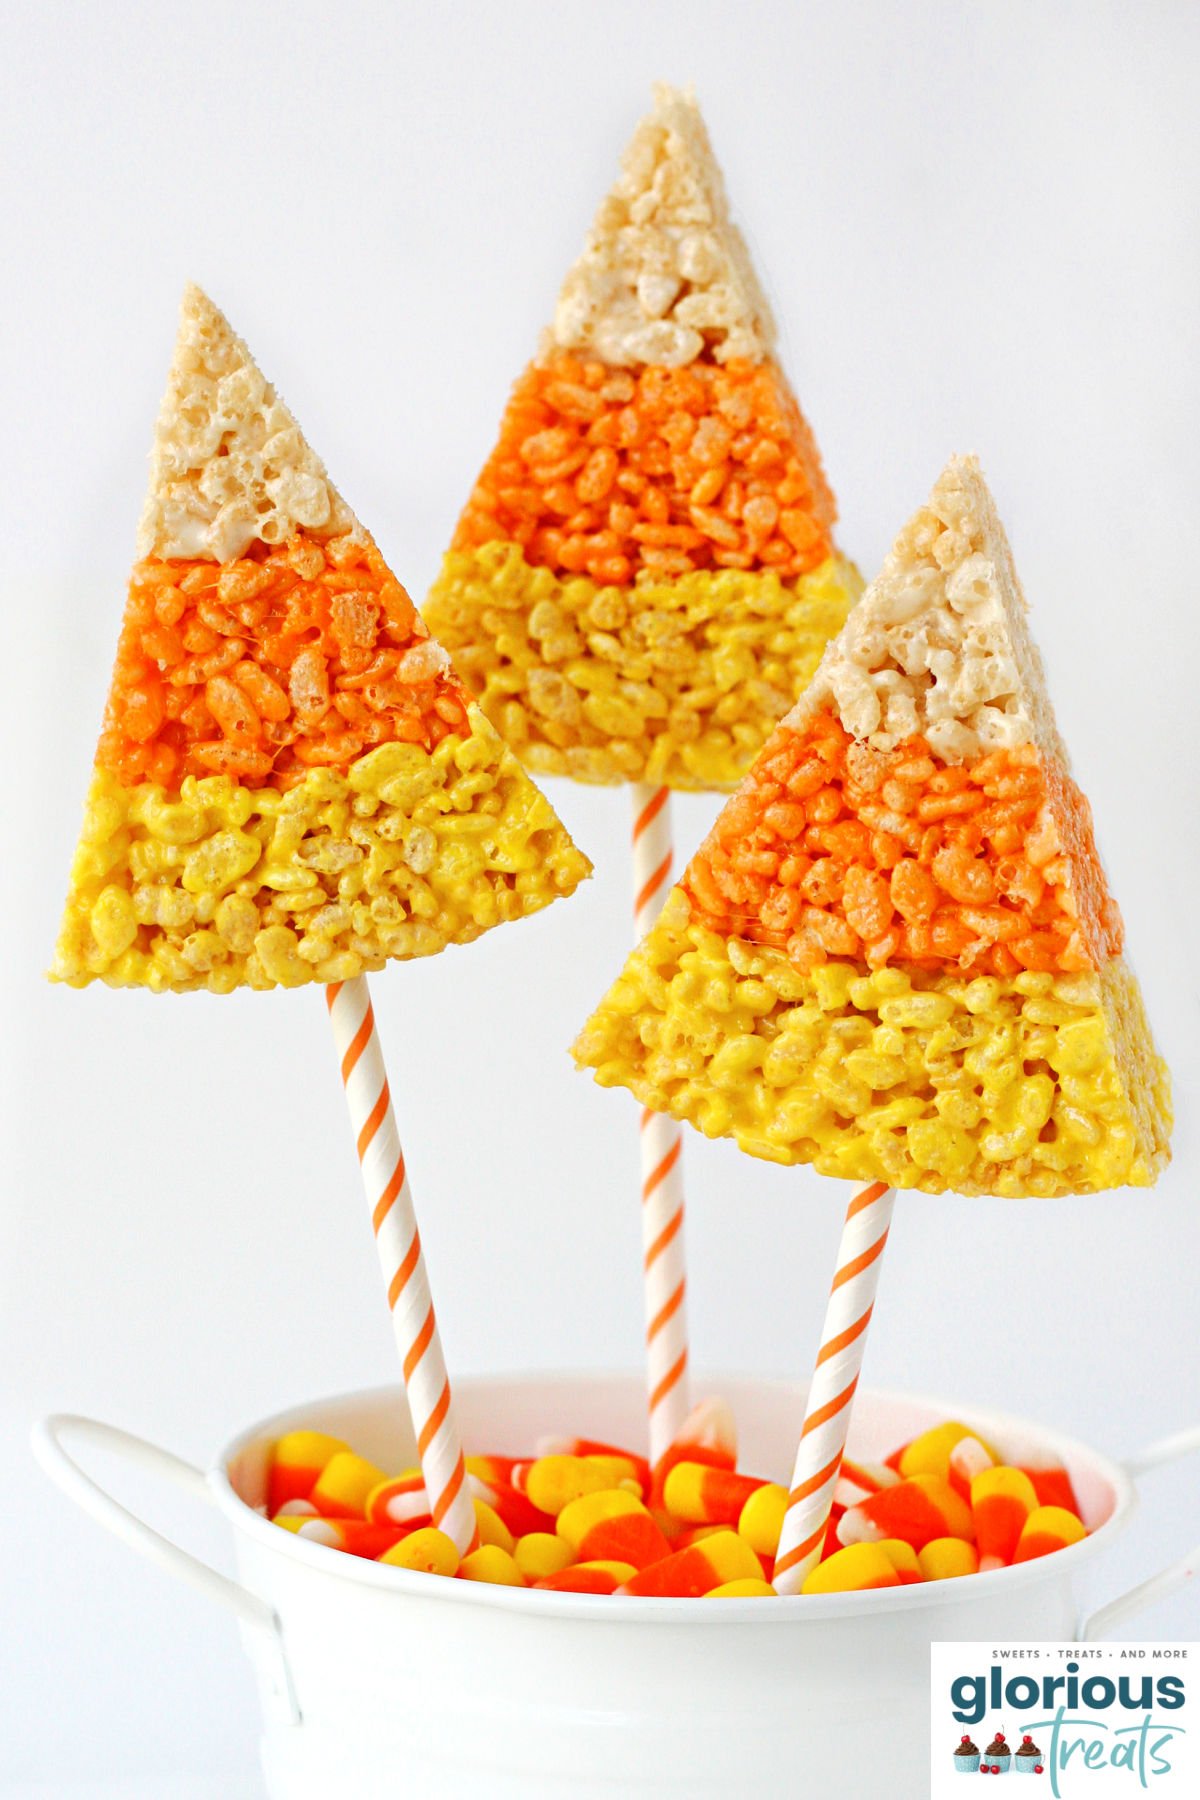 three wedge shaped rice krispie treats made to look like candy corn with straws inserted in the bottom. sitting in a white bucket filled with candy corn.